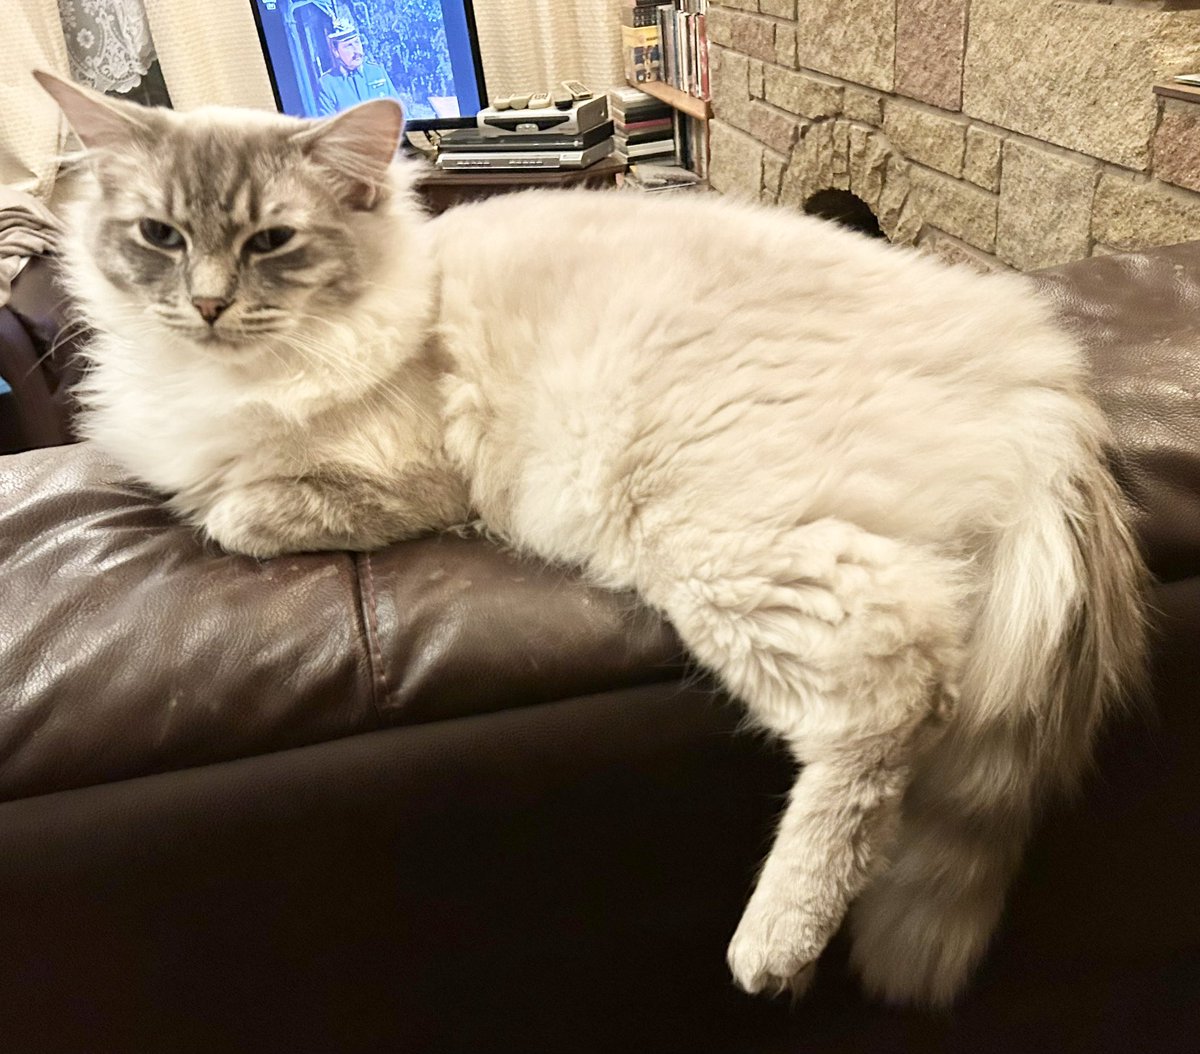 @MissyBBBobtail @kerrylalameow @RosieDicken @PaulKayRadio Meowy Moggytastic Caturday Saturday from pawsomely fluffy adorable lovely lazy Leo Cat😻🐾relaxing and posing on the back of Paul’s armchair in the living room😹🐾Cloudy hazy windy in Shropshire, England😽🐾#RagDollCat #CatsOfTwitter